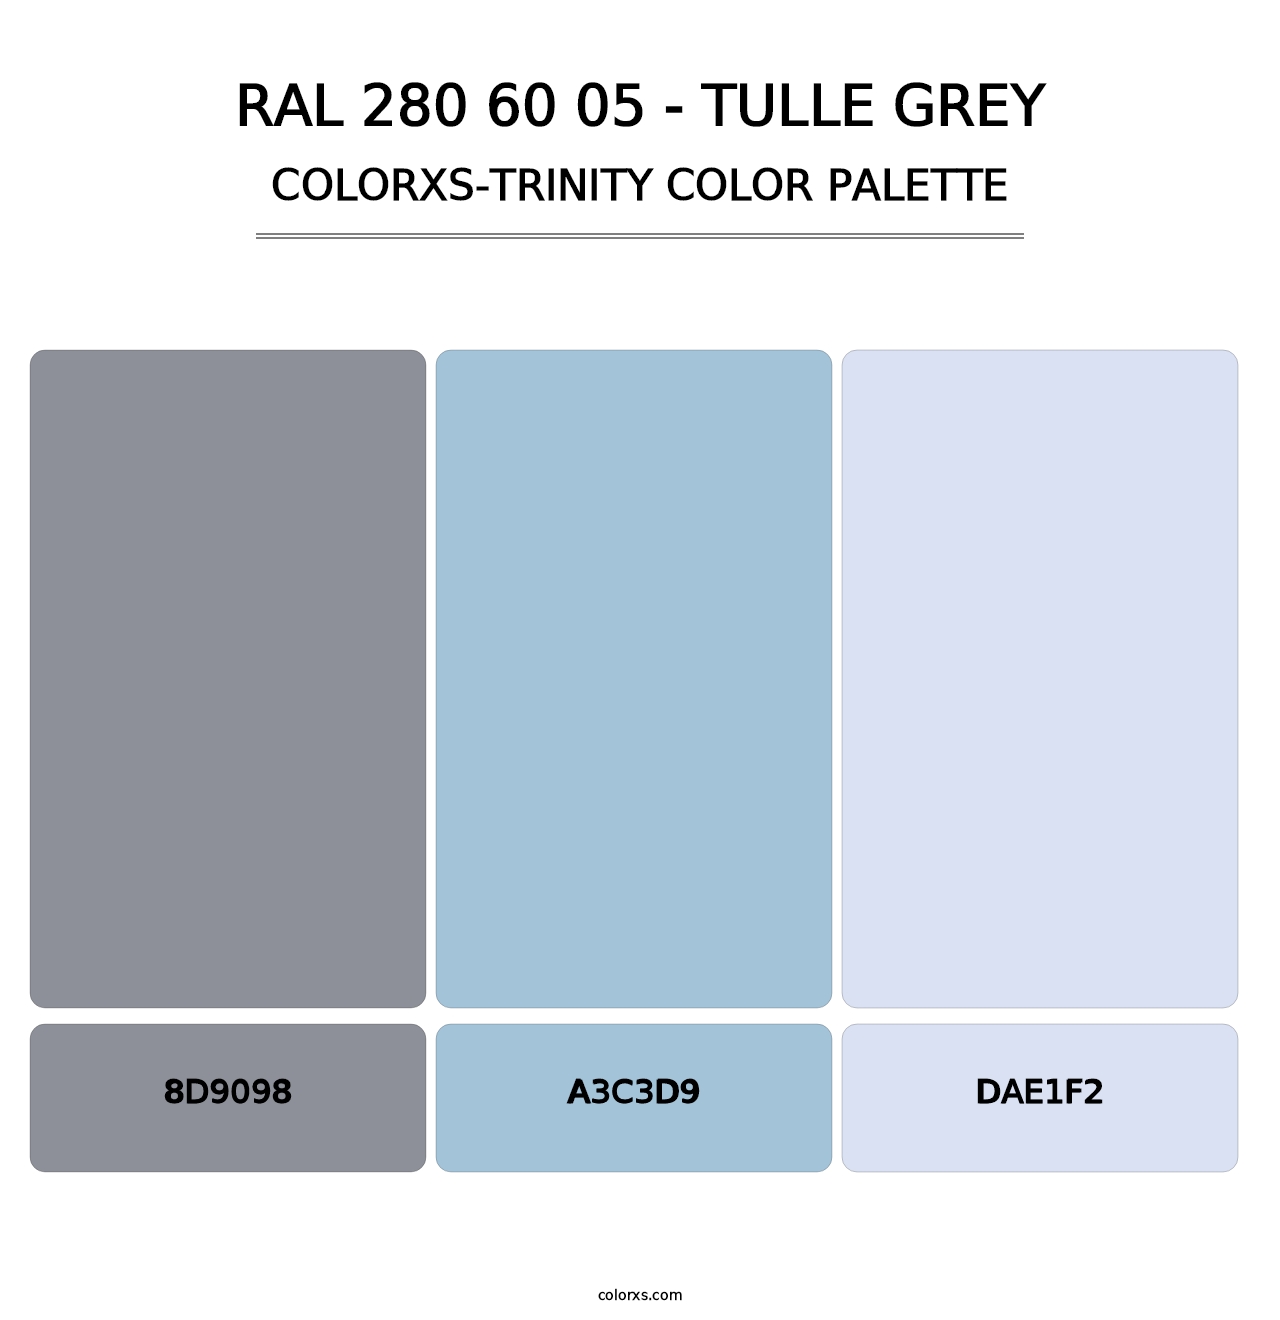 RAL 280 60 05 - Tulle Grey - Colorxs Trinity Palette